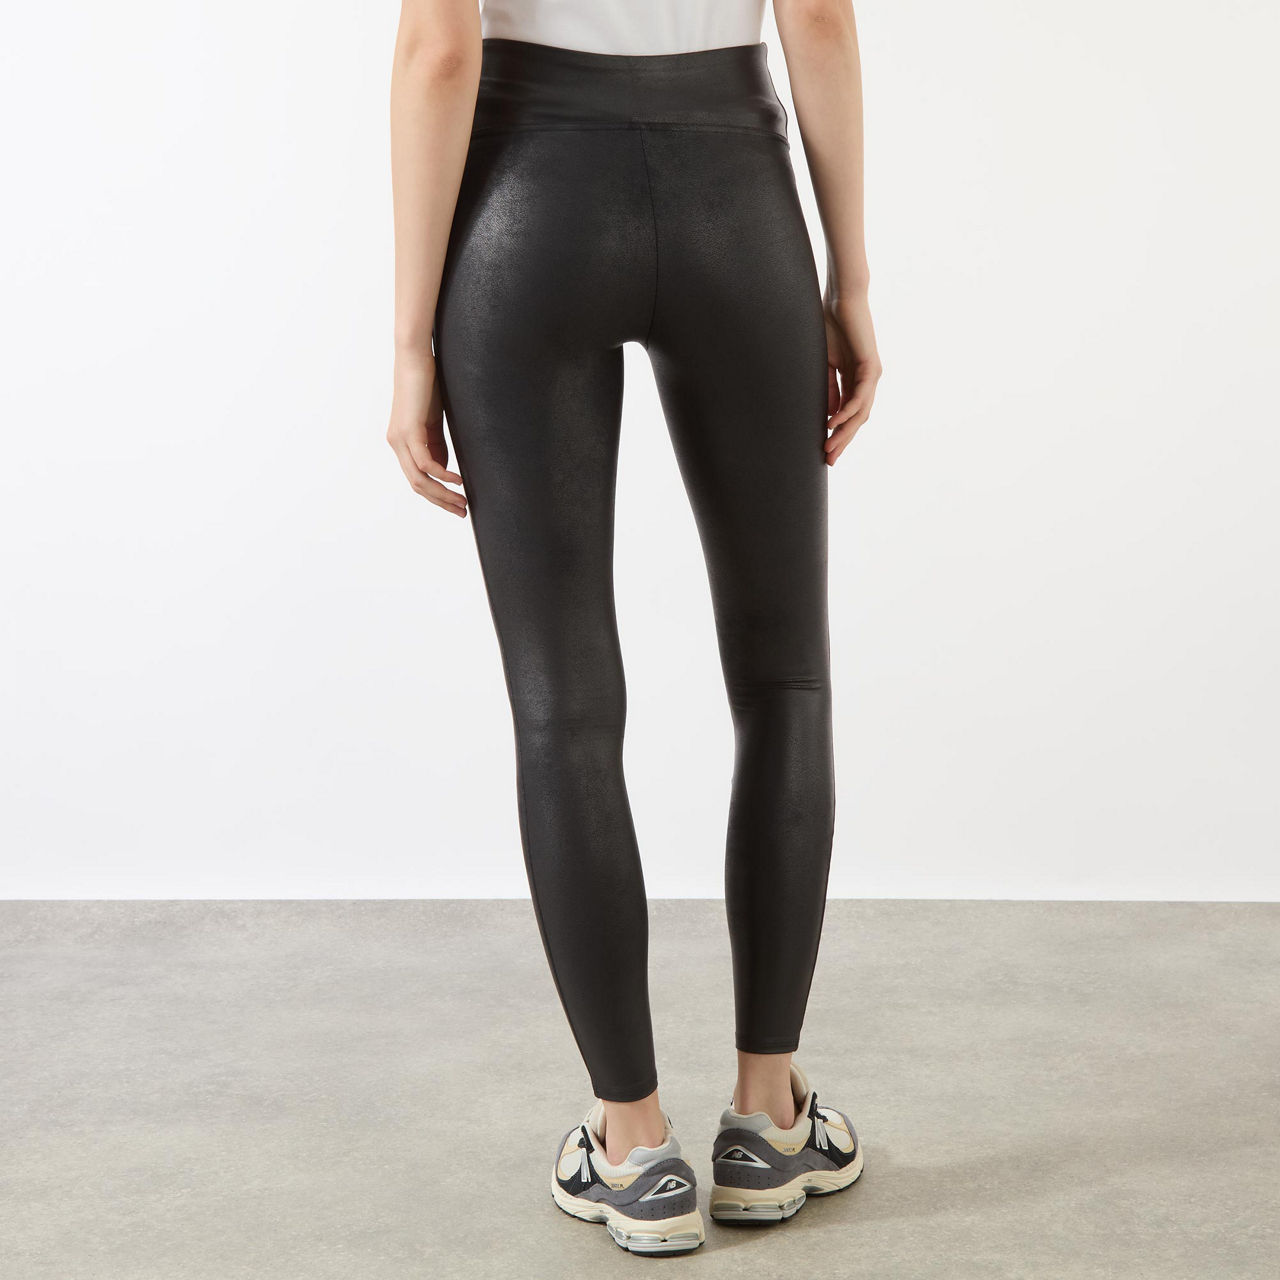 Brown Thomas - The hottest leggings in town, the SPANX Faux